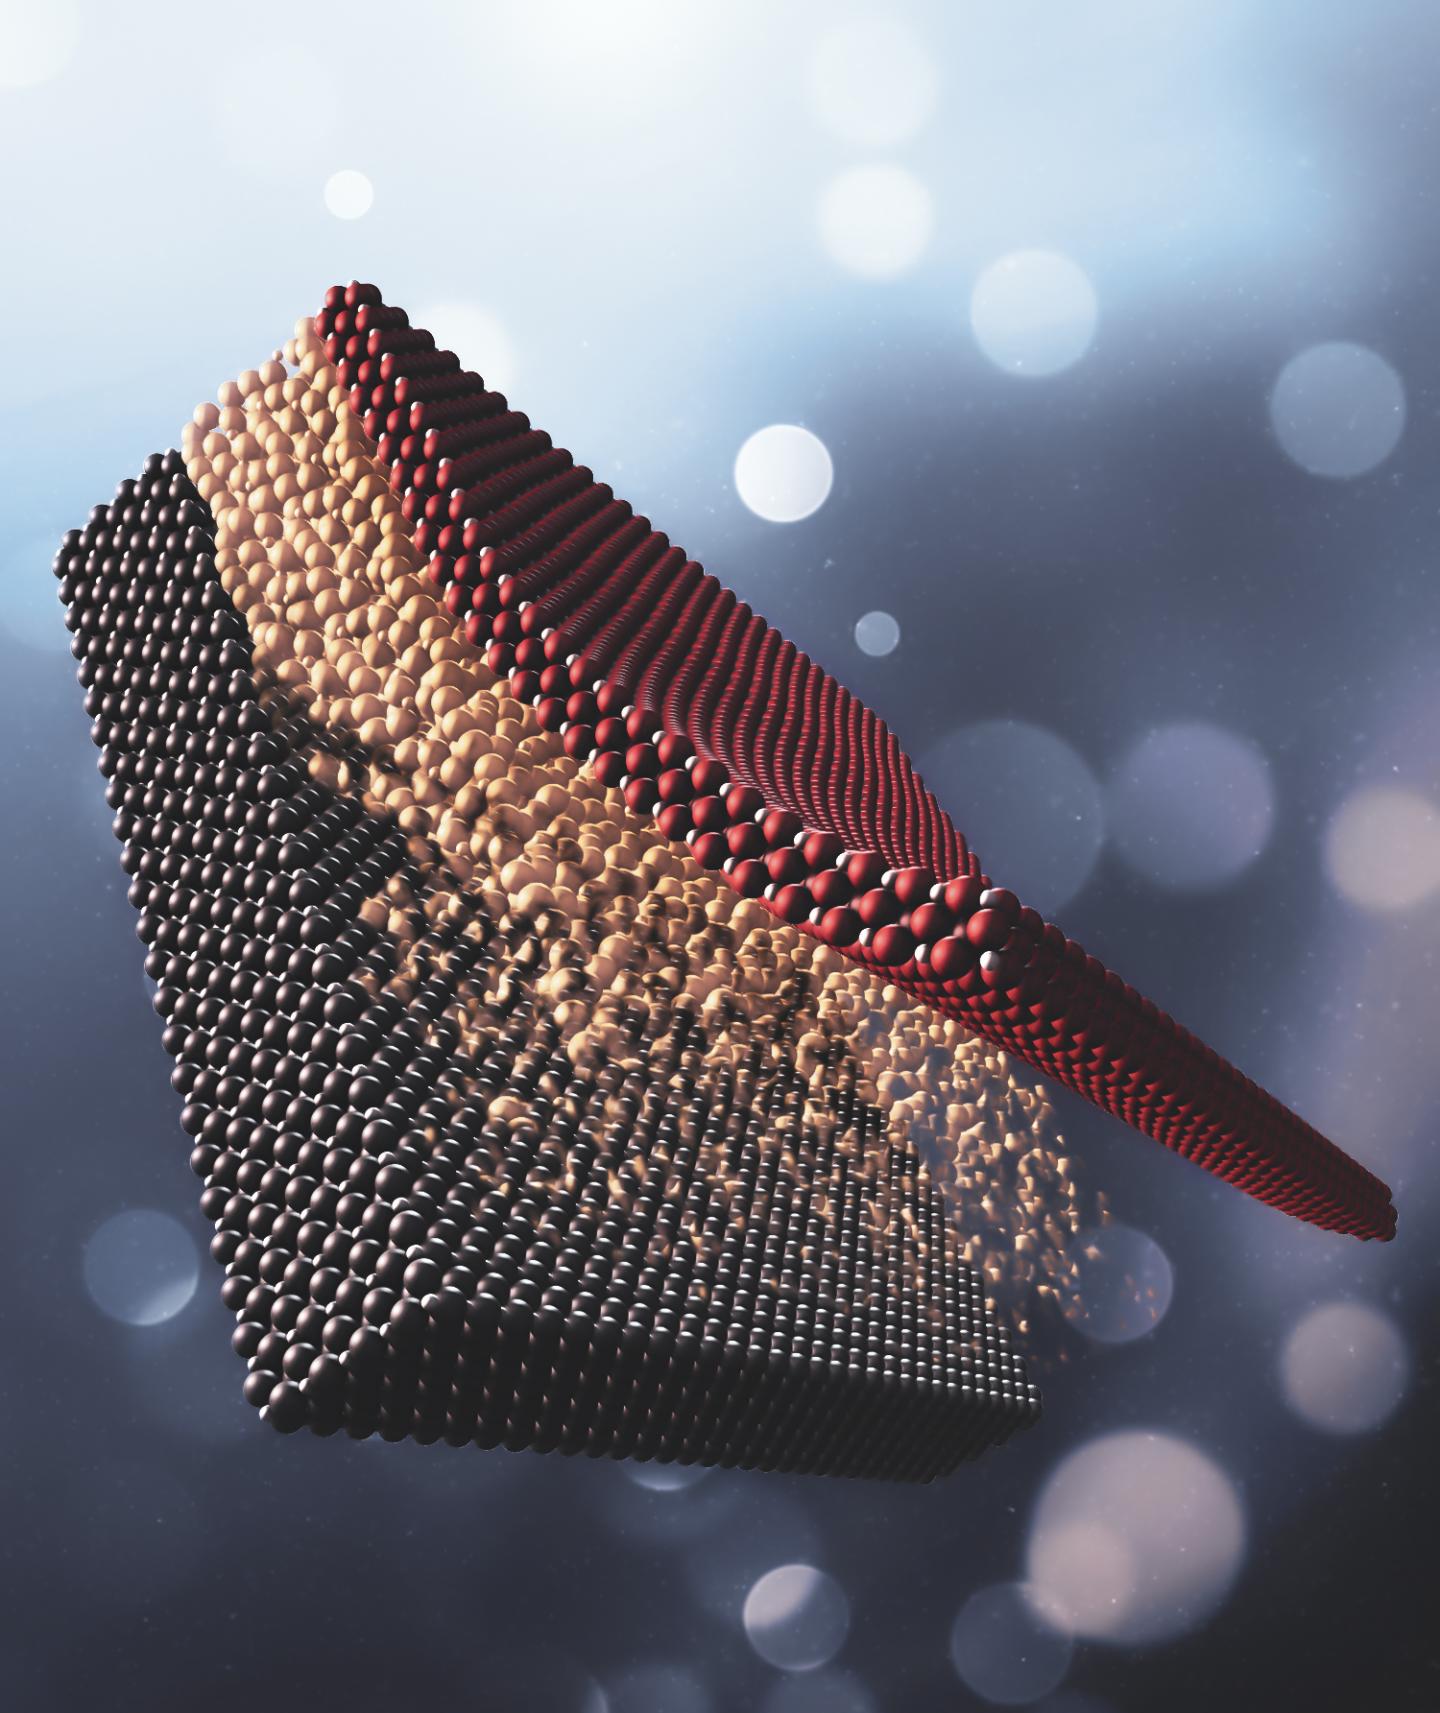 Creating a thin, flexible version of a brittle oxide material